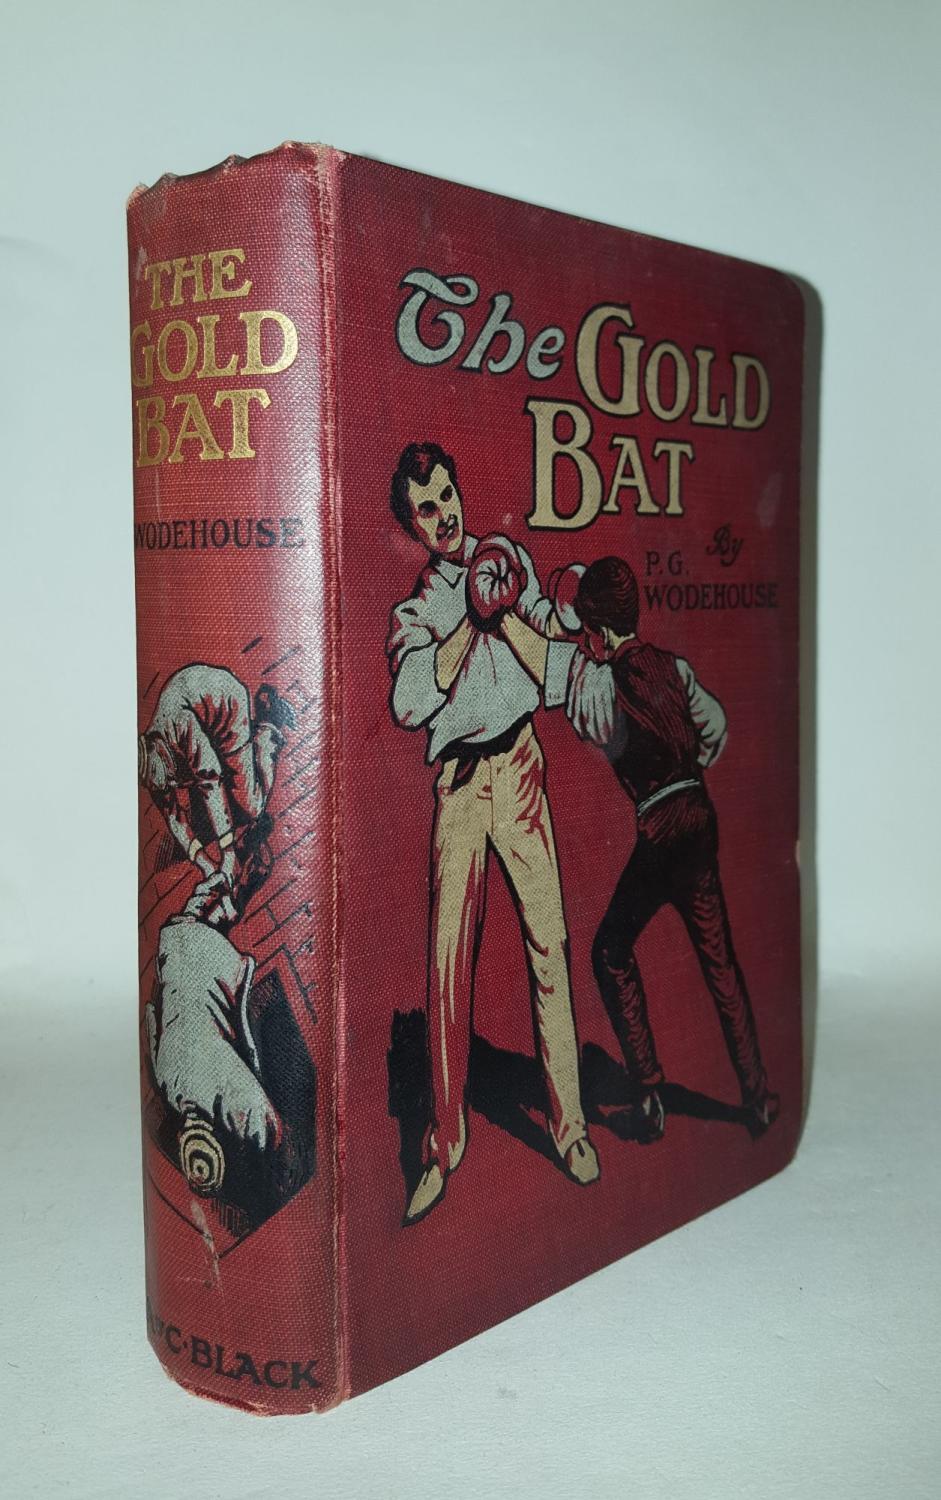 Red Black and Gold Bat Logo - THE GOLD BAT by WODEHOUSE P. G.: Adam and Charles Black, 1911